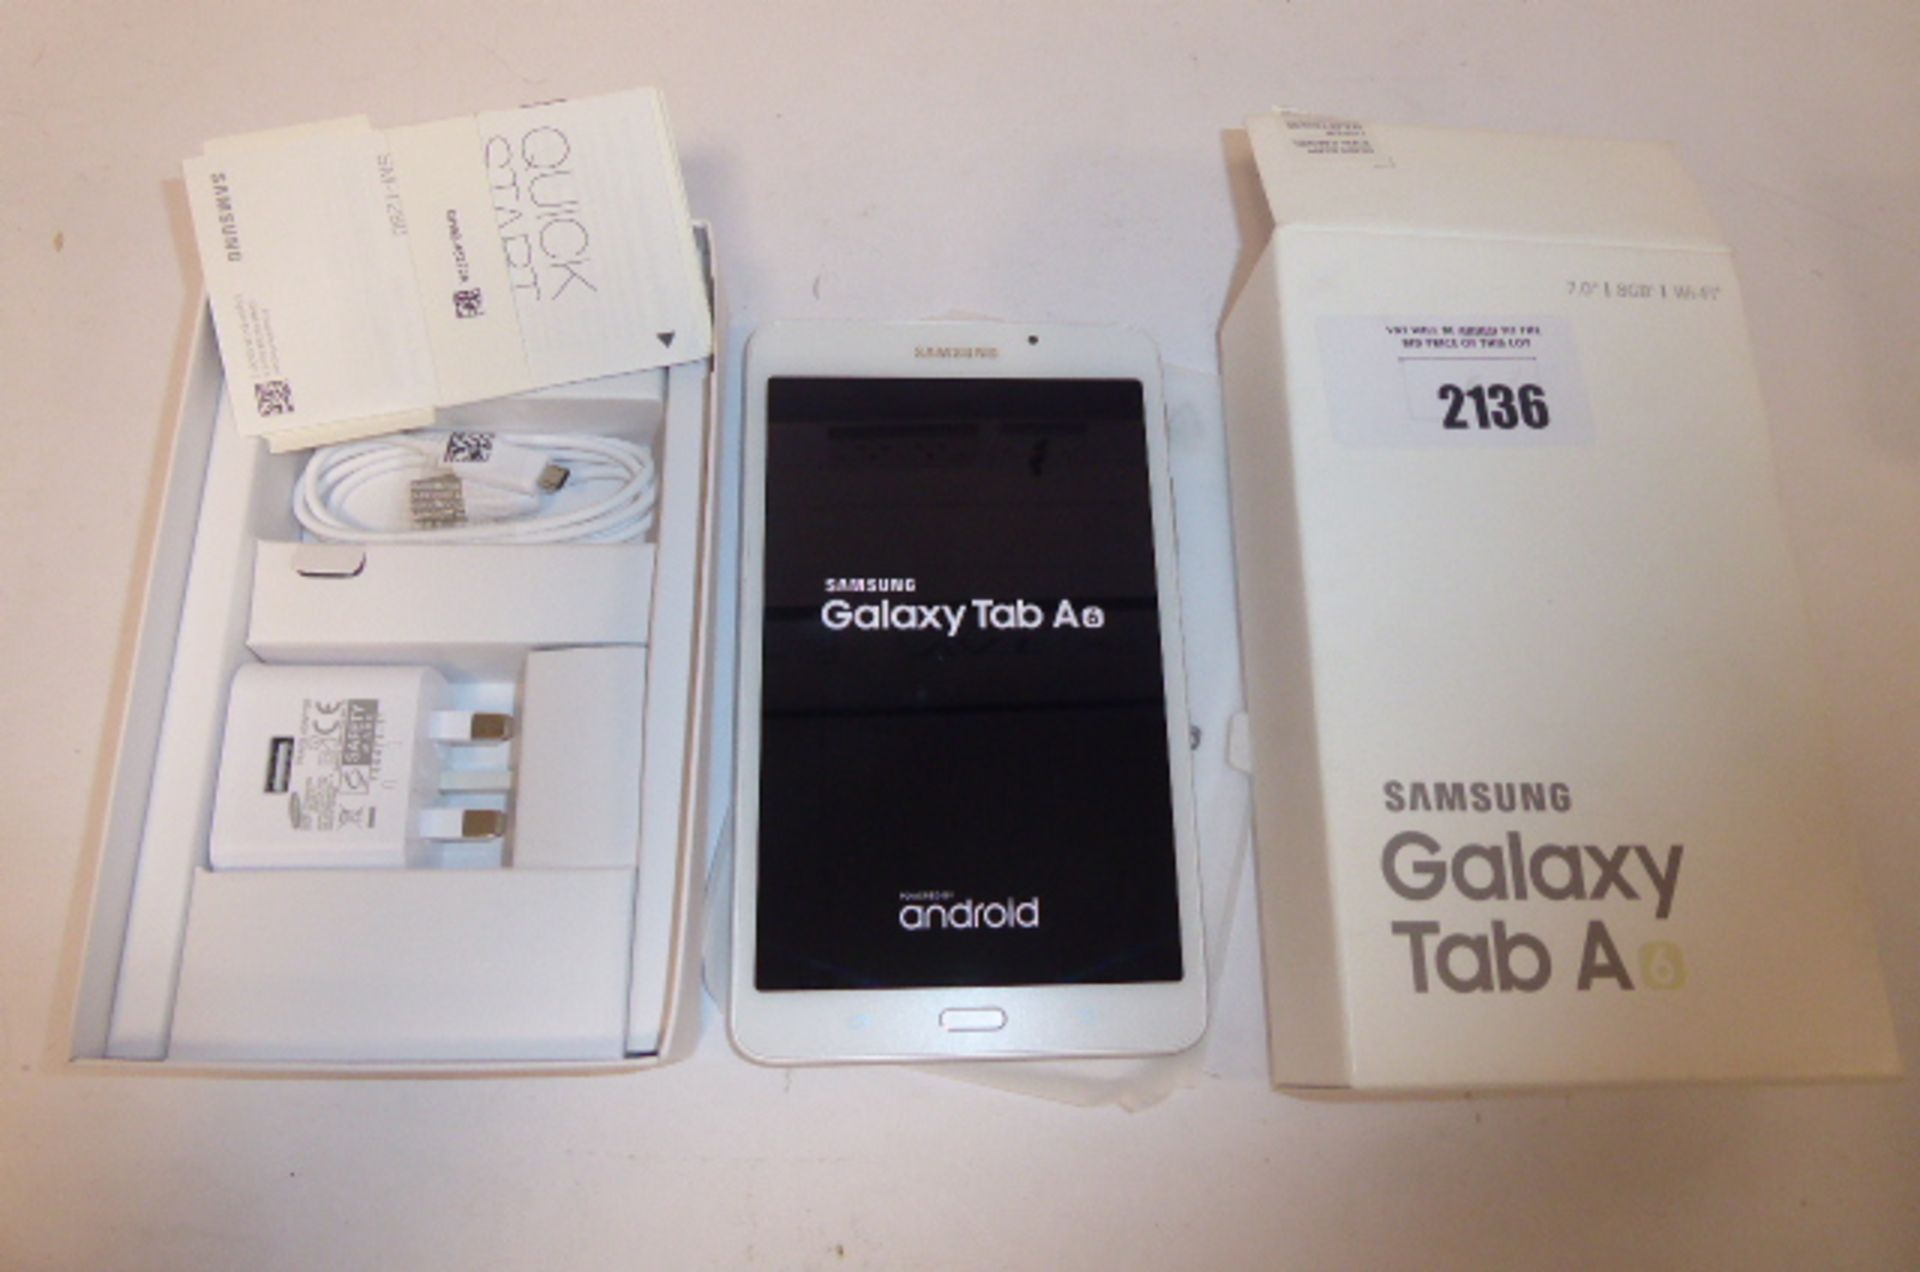 Samsung Galaxy Tab A6 7'' tablet, 8gb in white with box and charger.